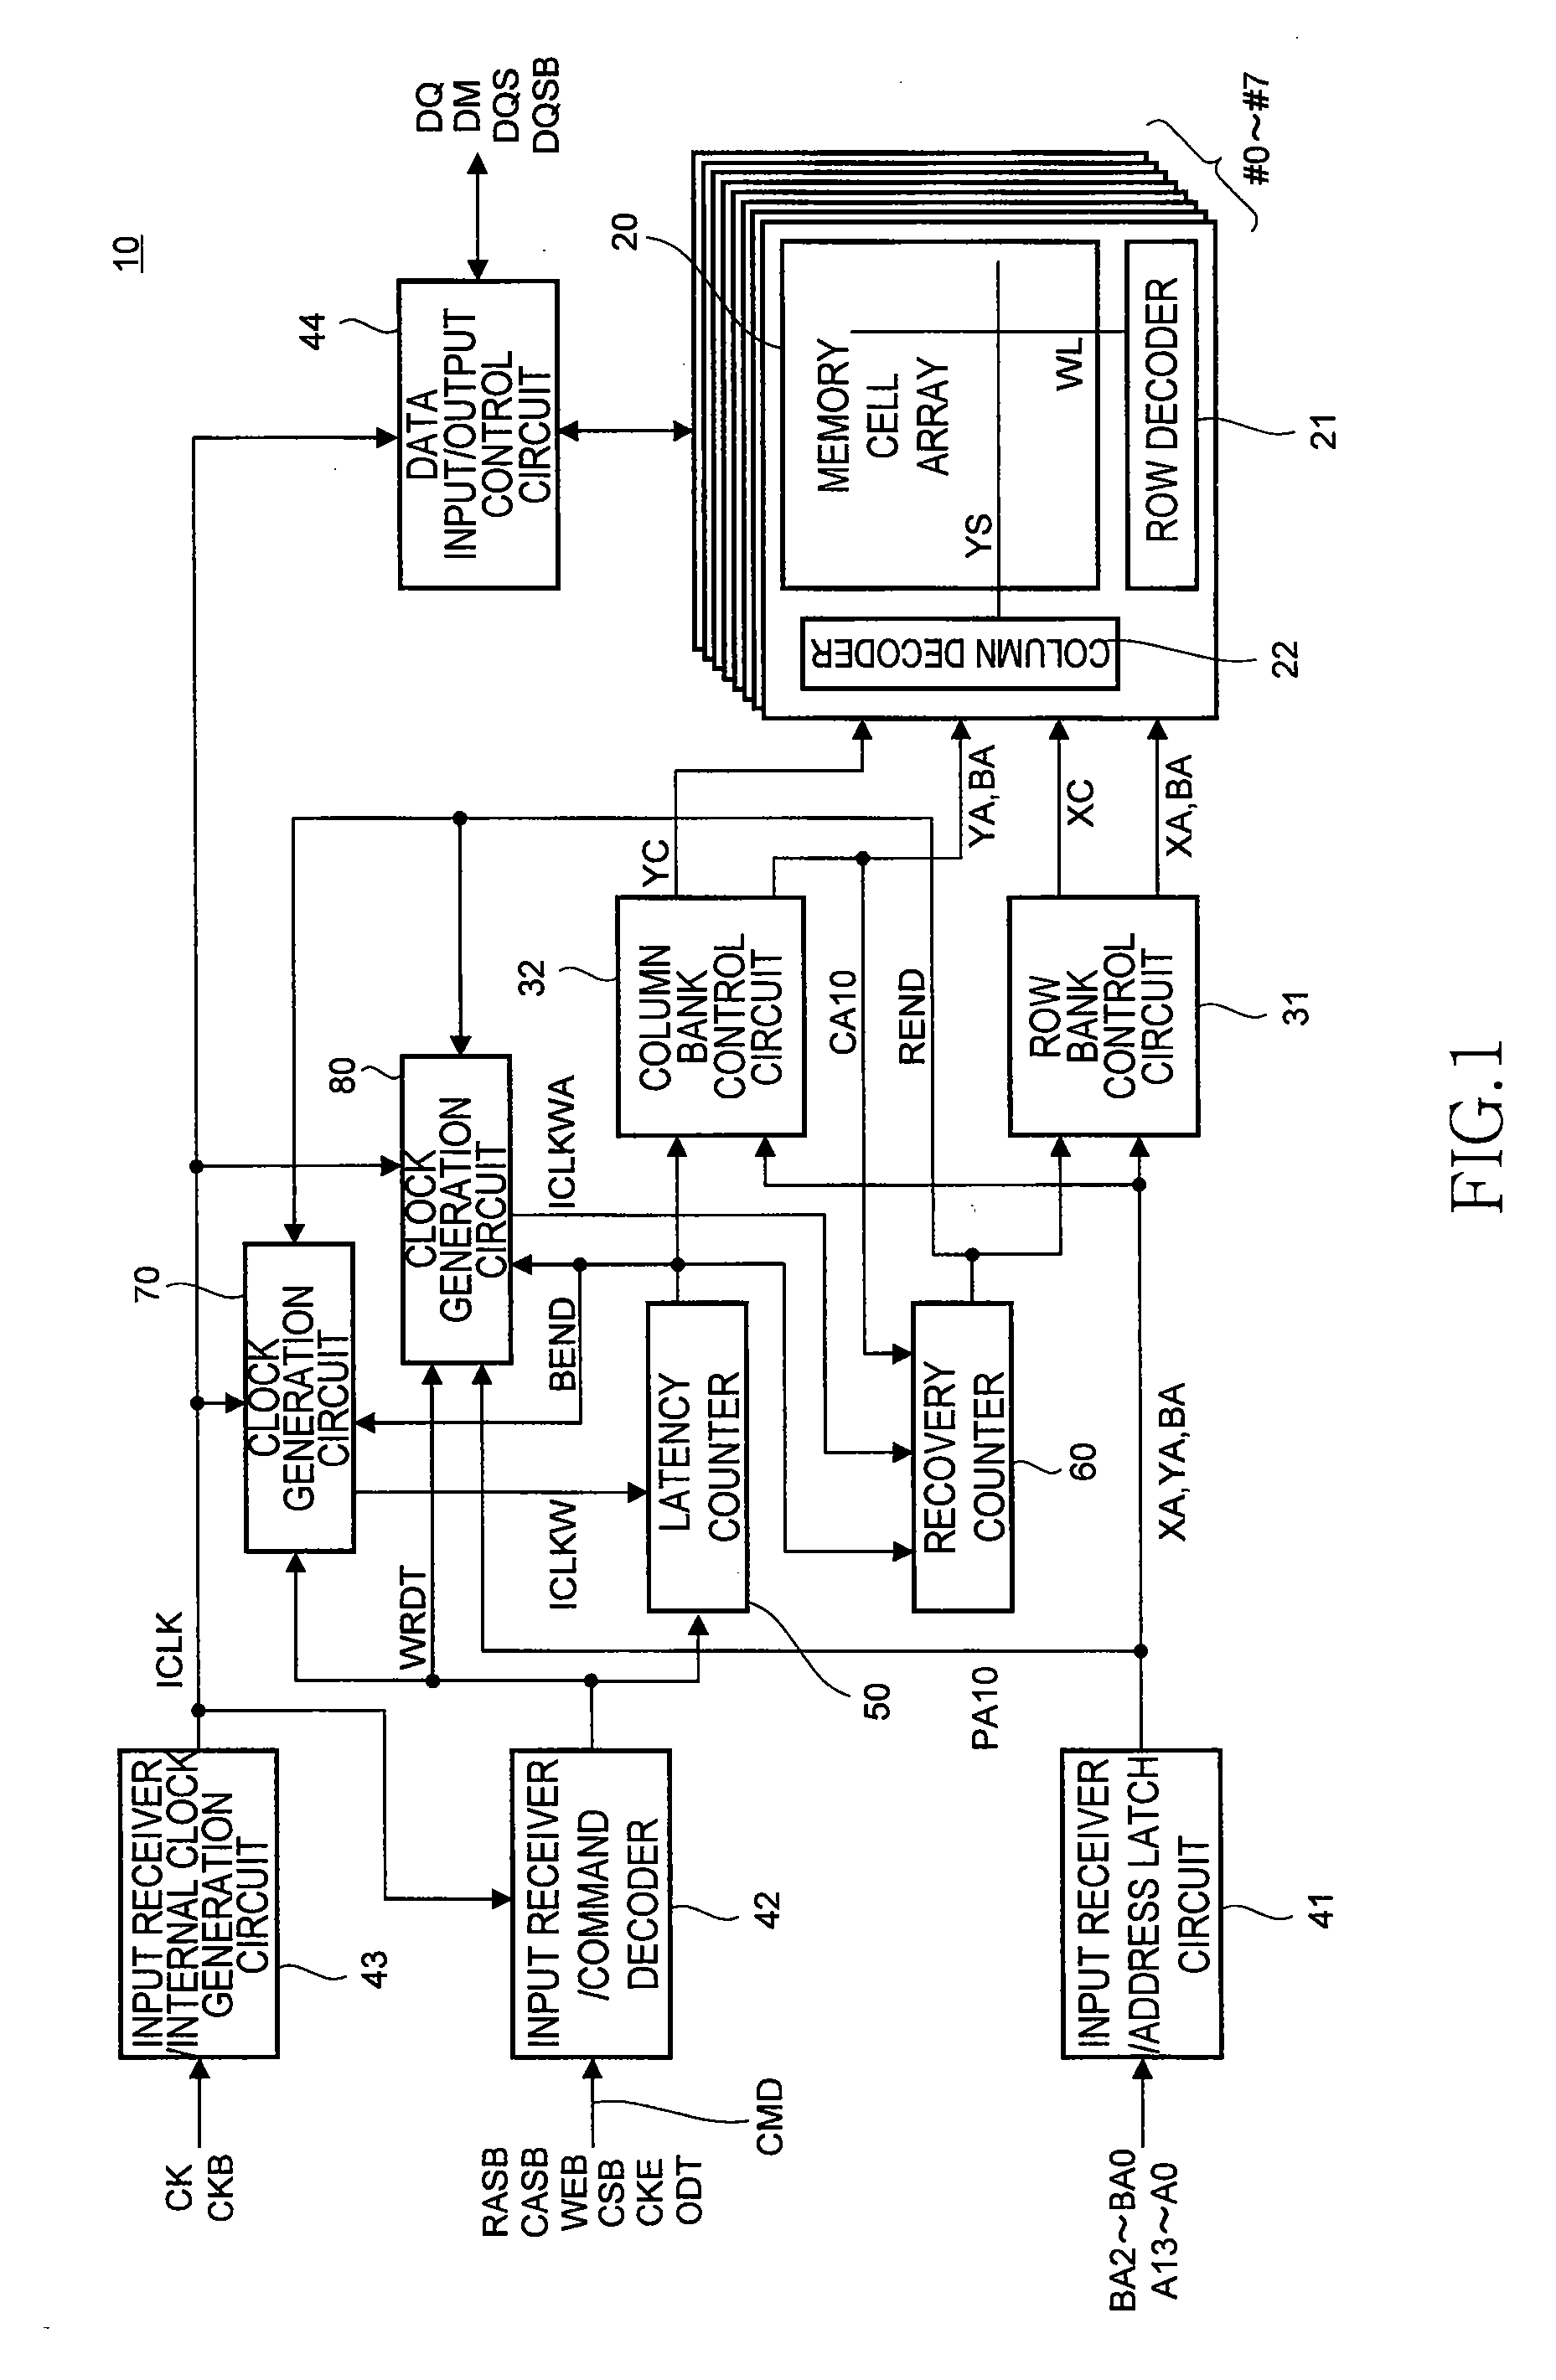 Semiconductor memory device having auto-precharge function